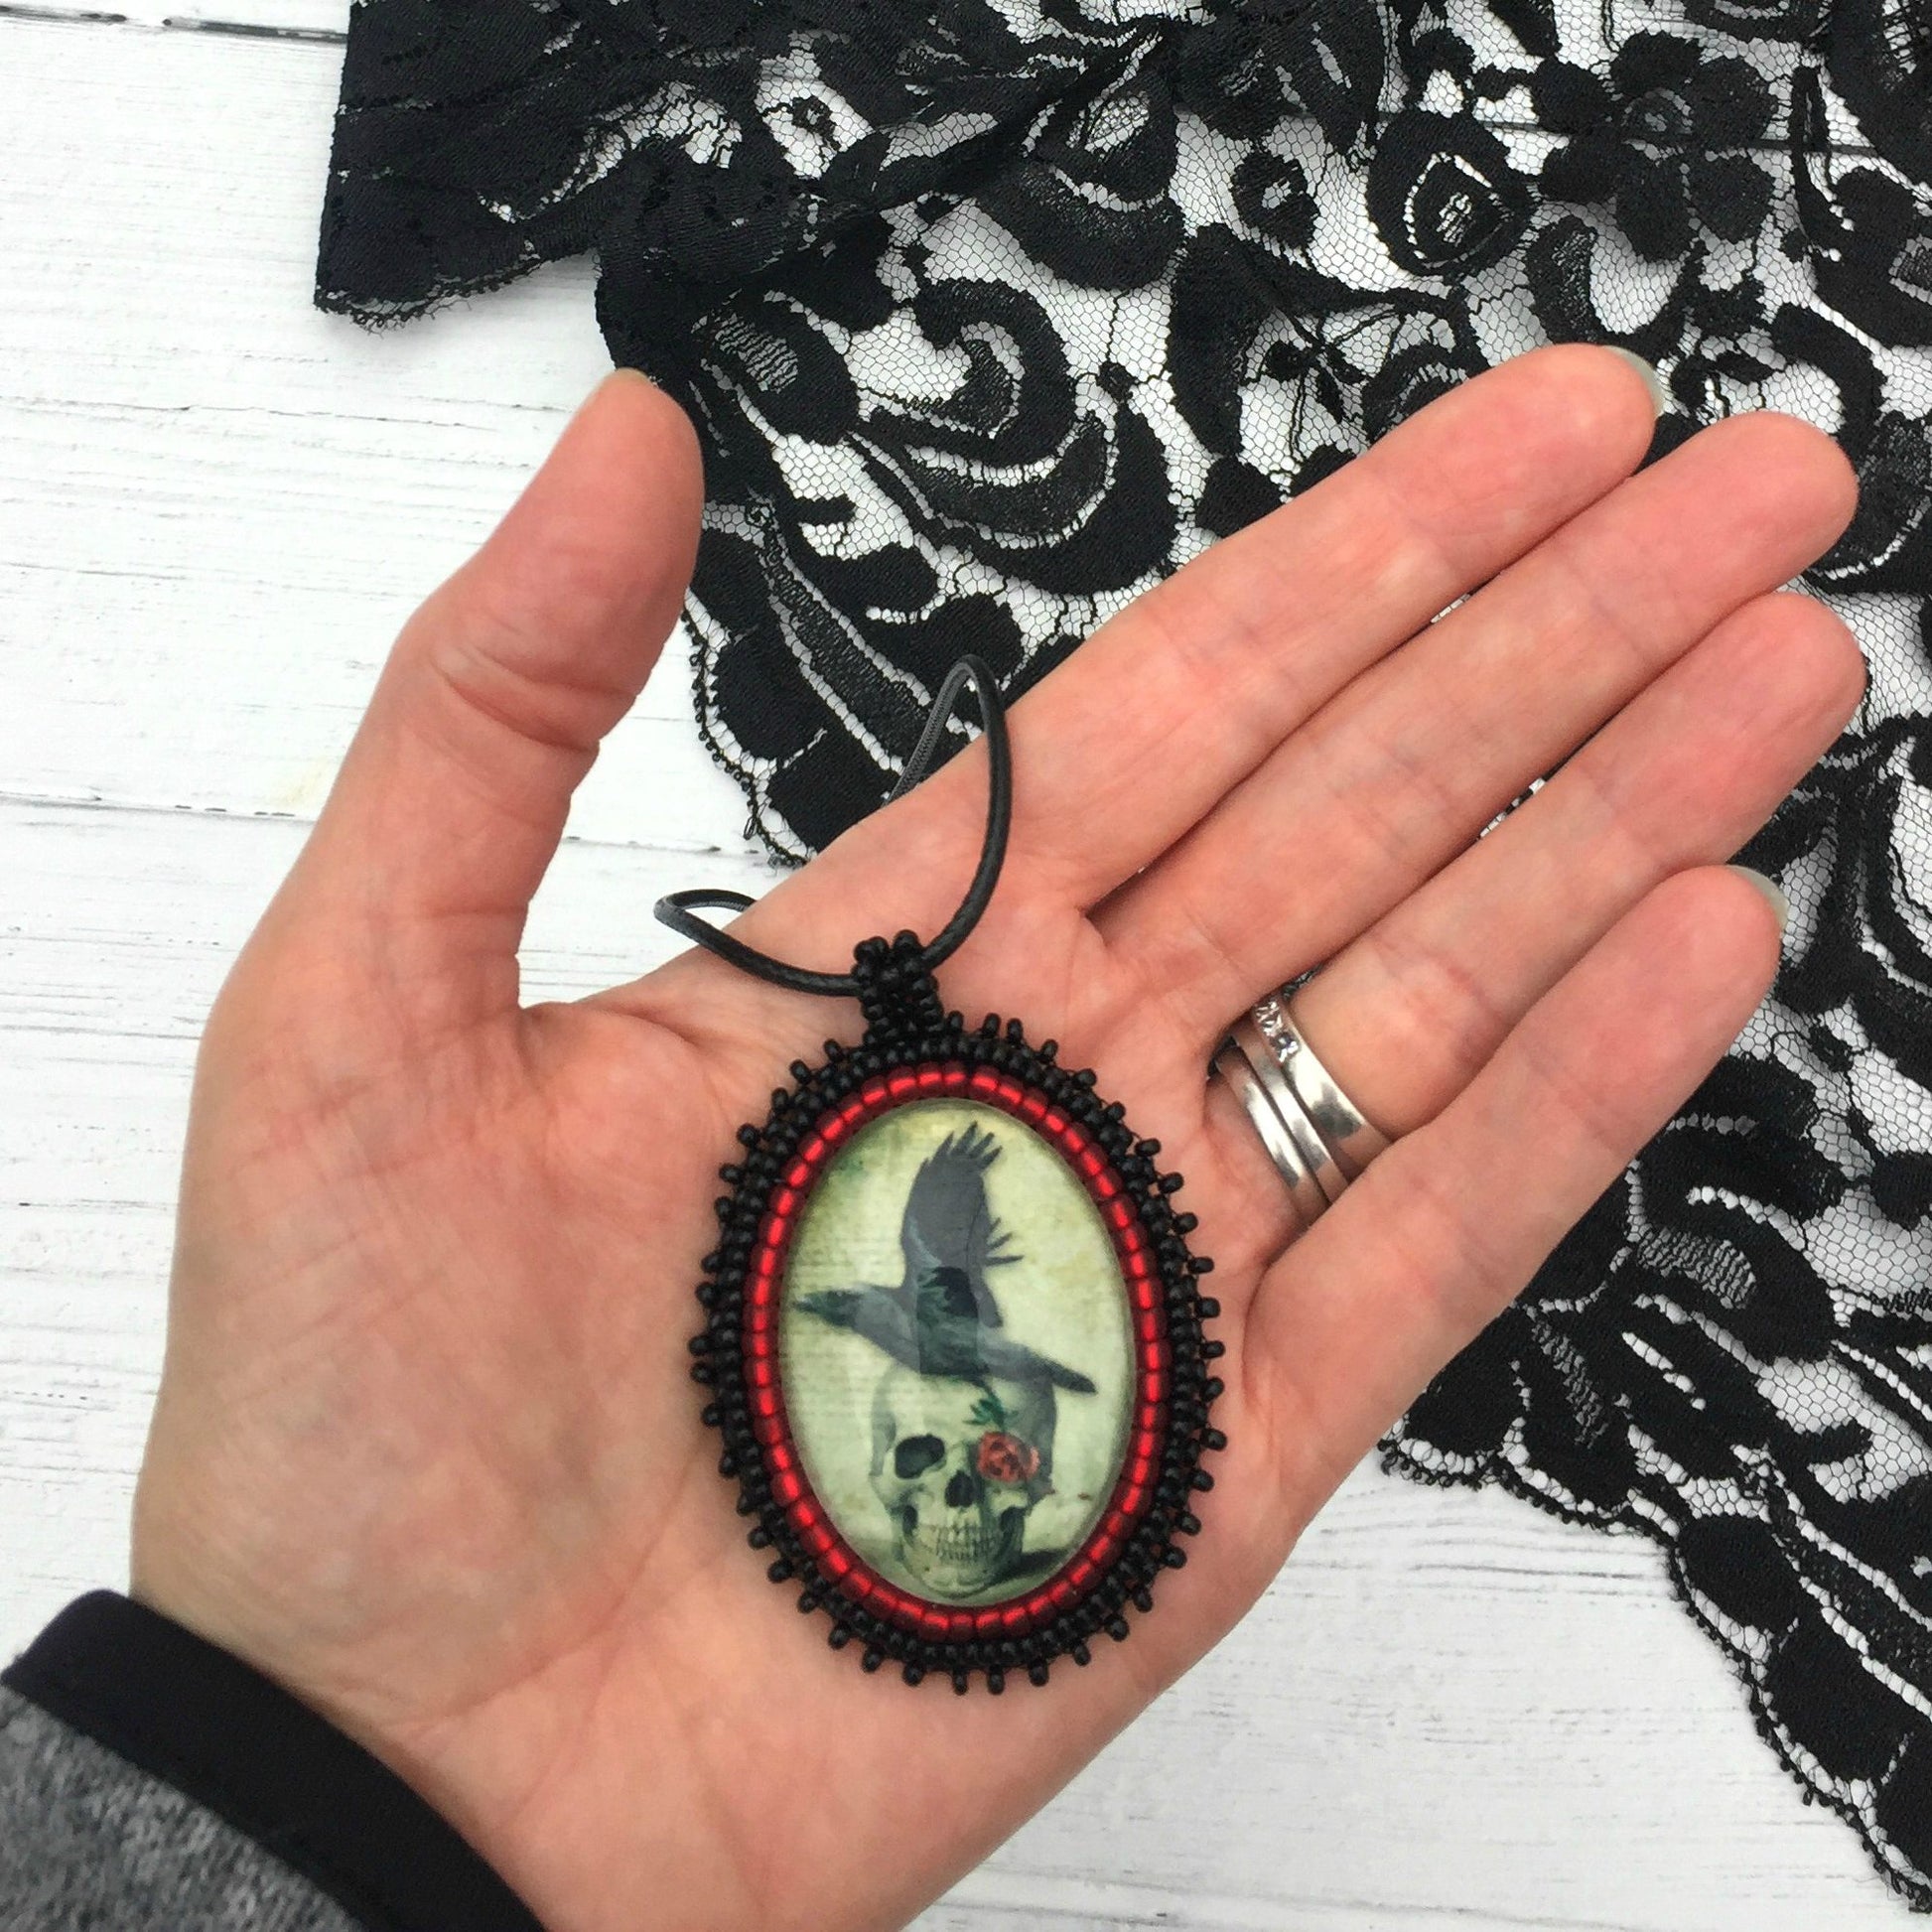 raven and skull pendant in hand